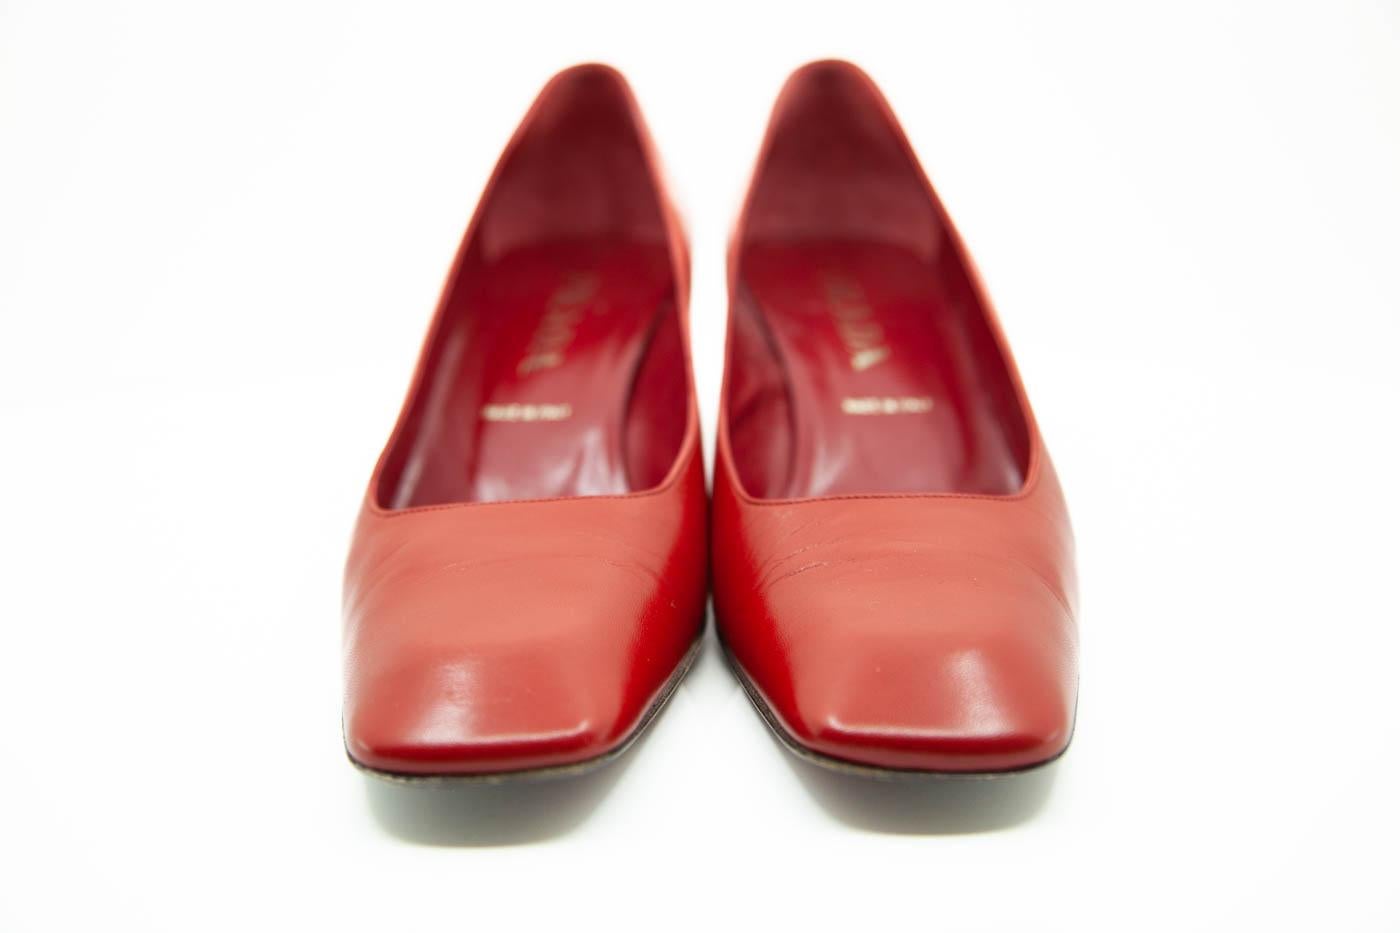 Prada red leather square toe and block style heels. Very Vintage. Original box and dust bag.
size U.S 10